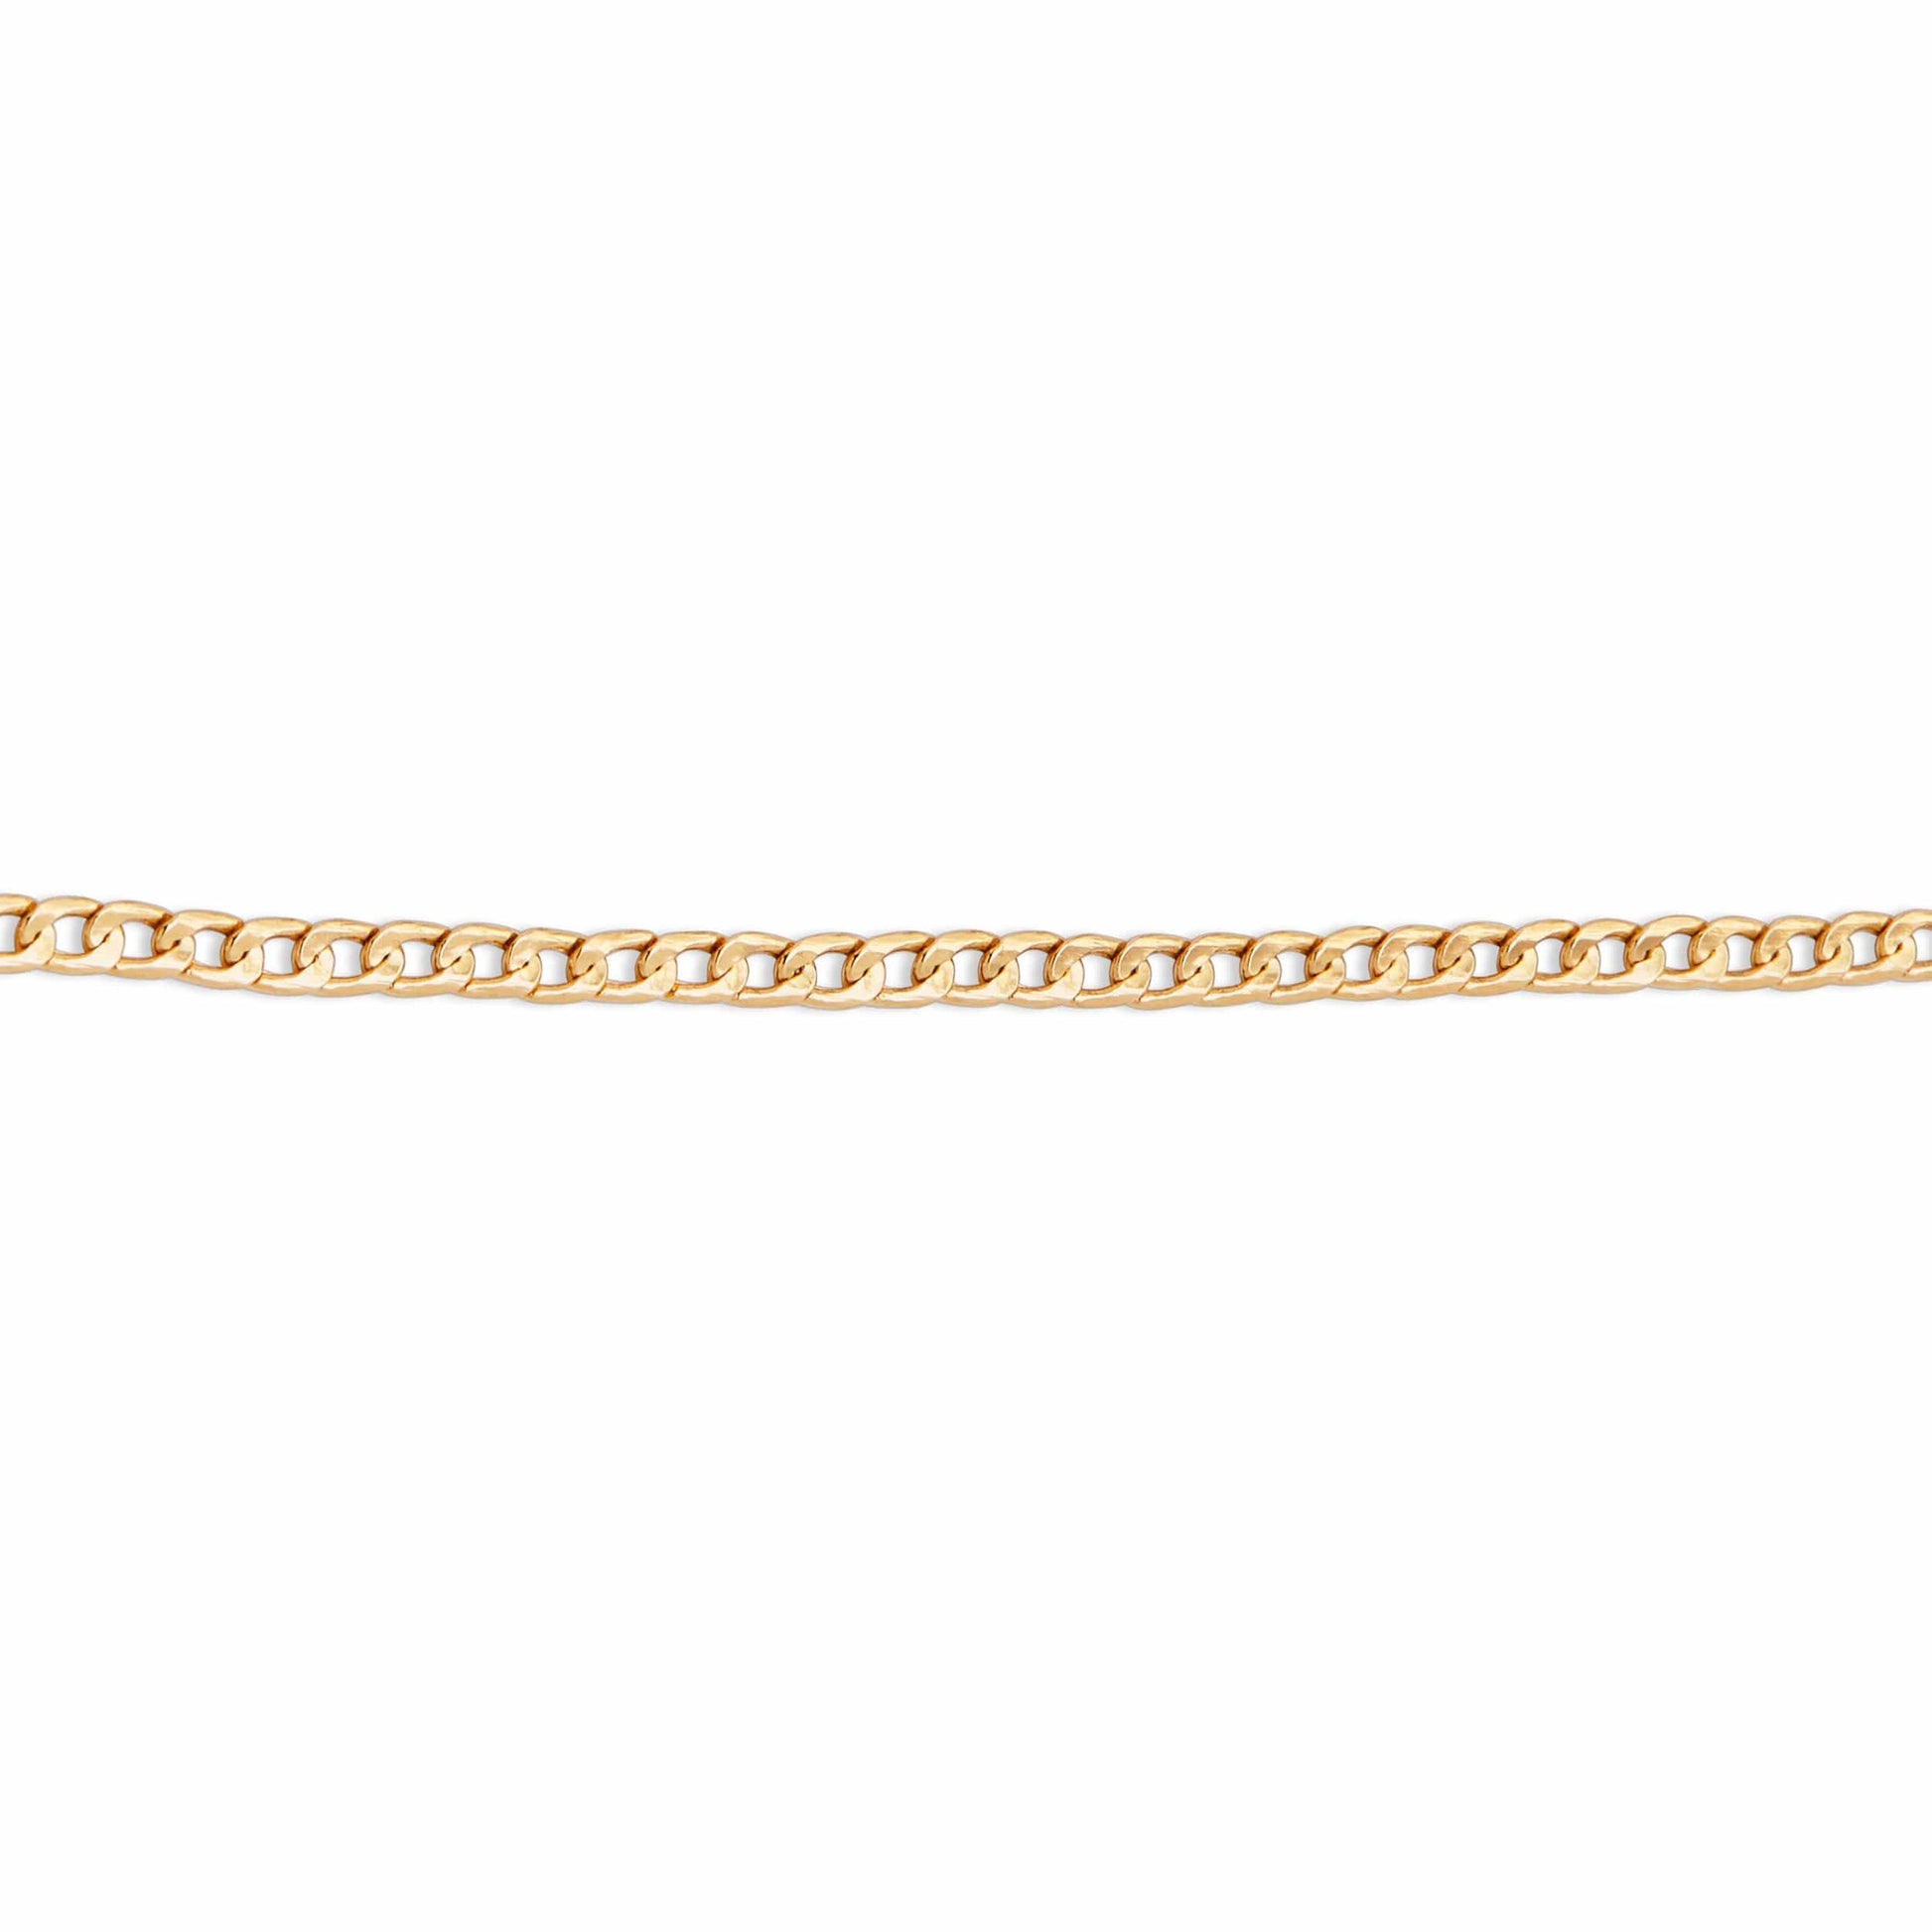 MONDO CATTOLICO Jewelry Cm 60 (23.6 in) 18 kt Yellow Gold Curb Chain